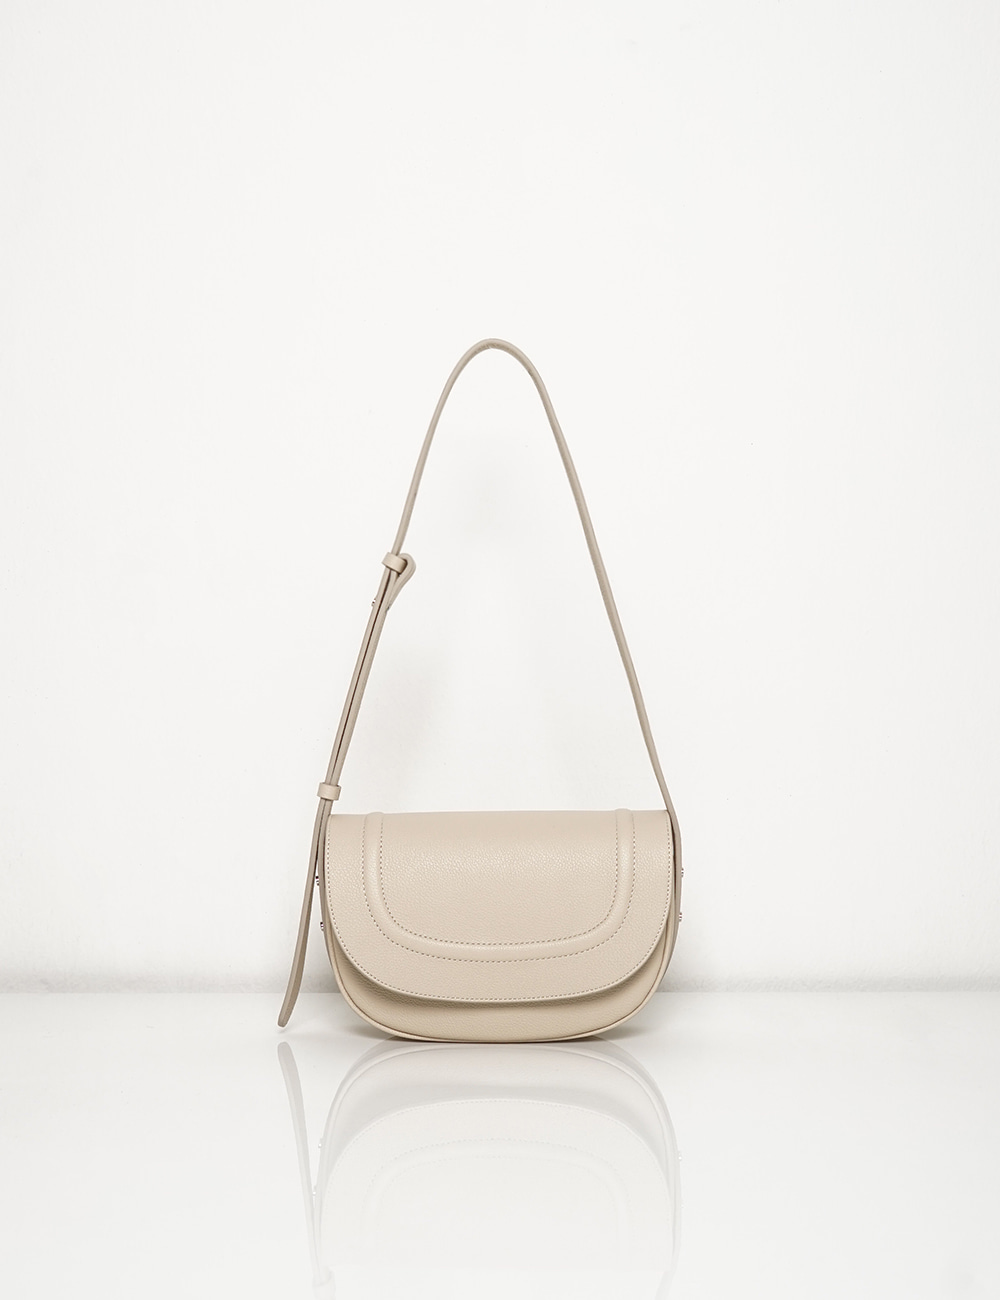 LONI small embo / cream (sold out)